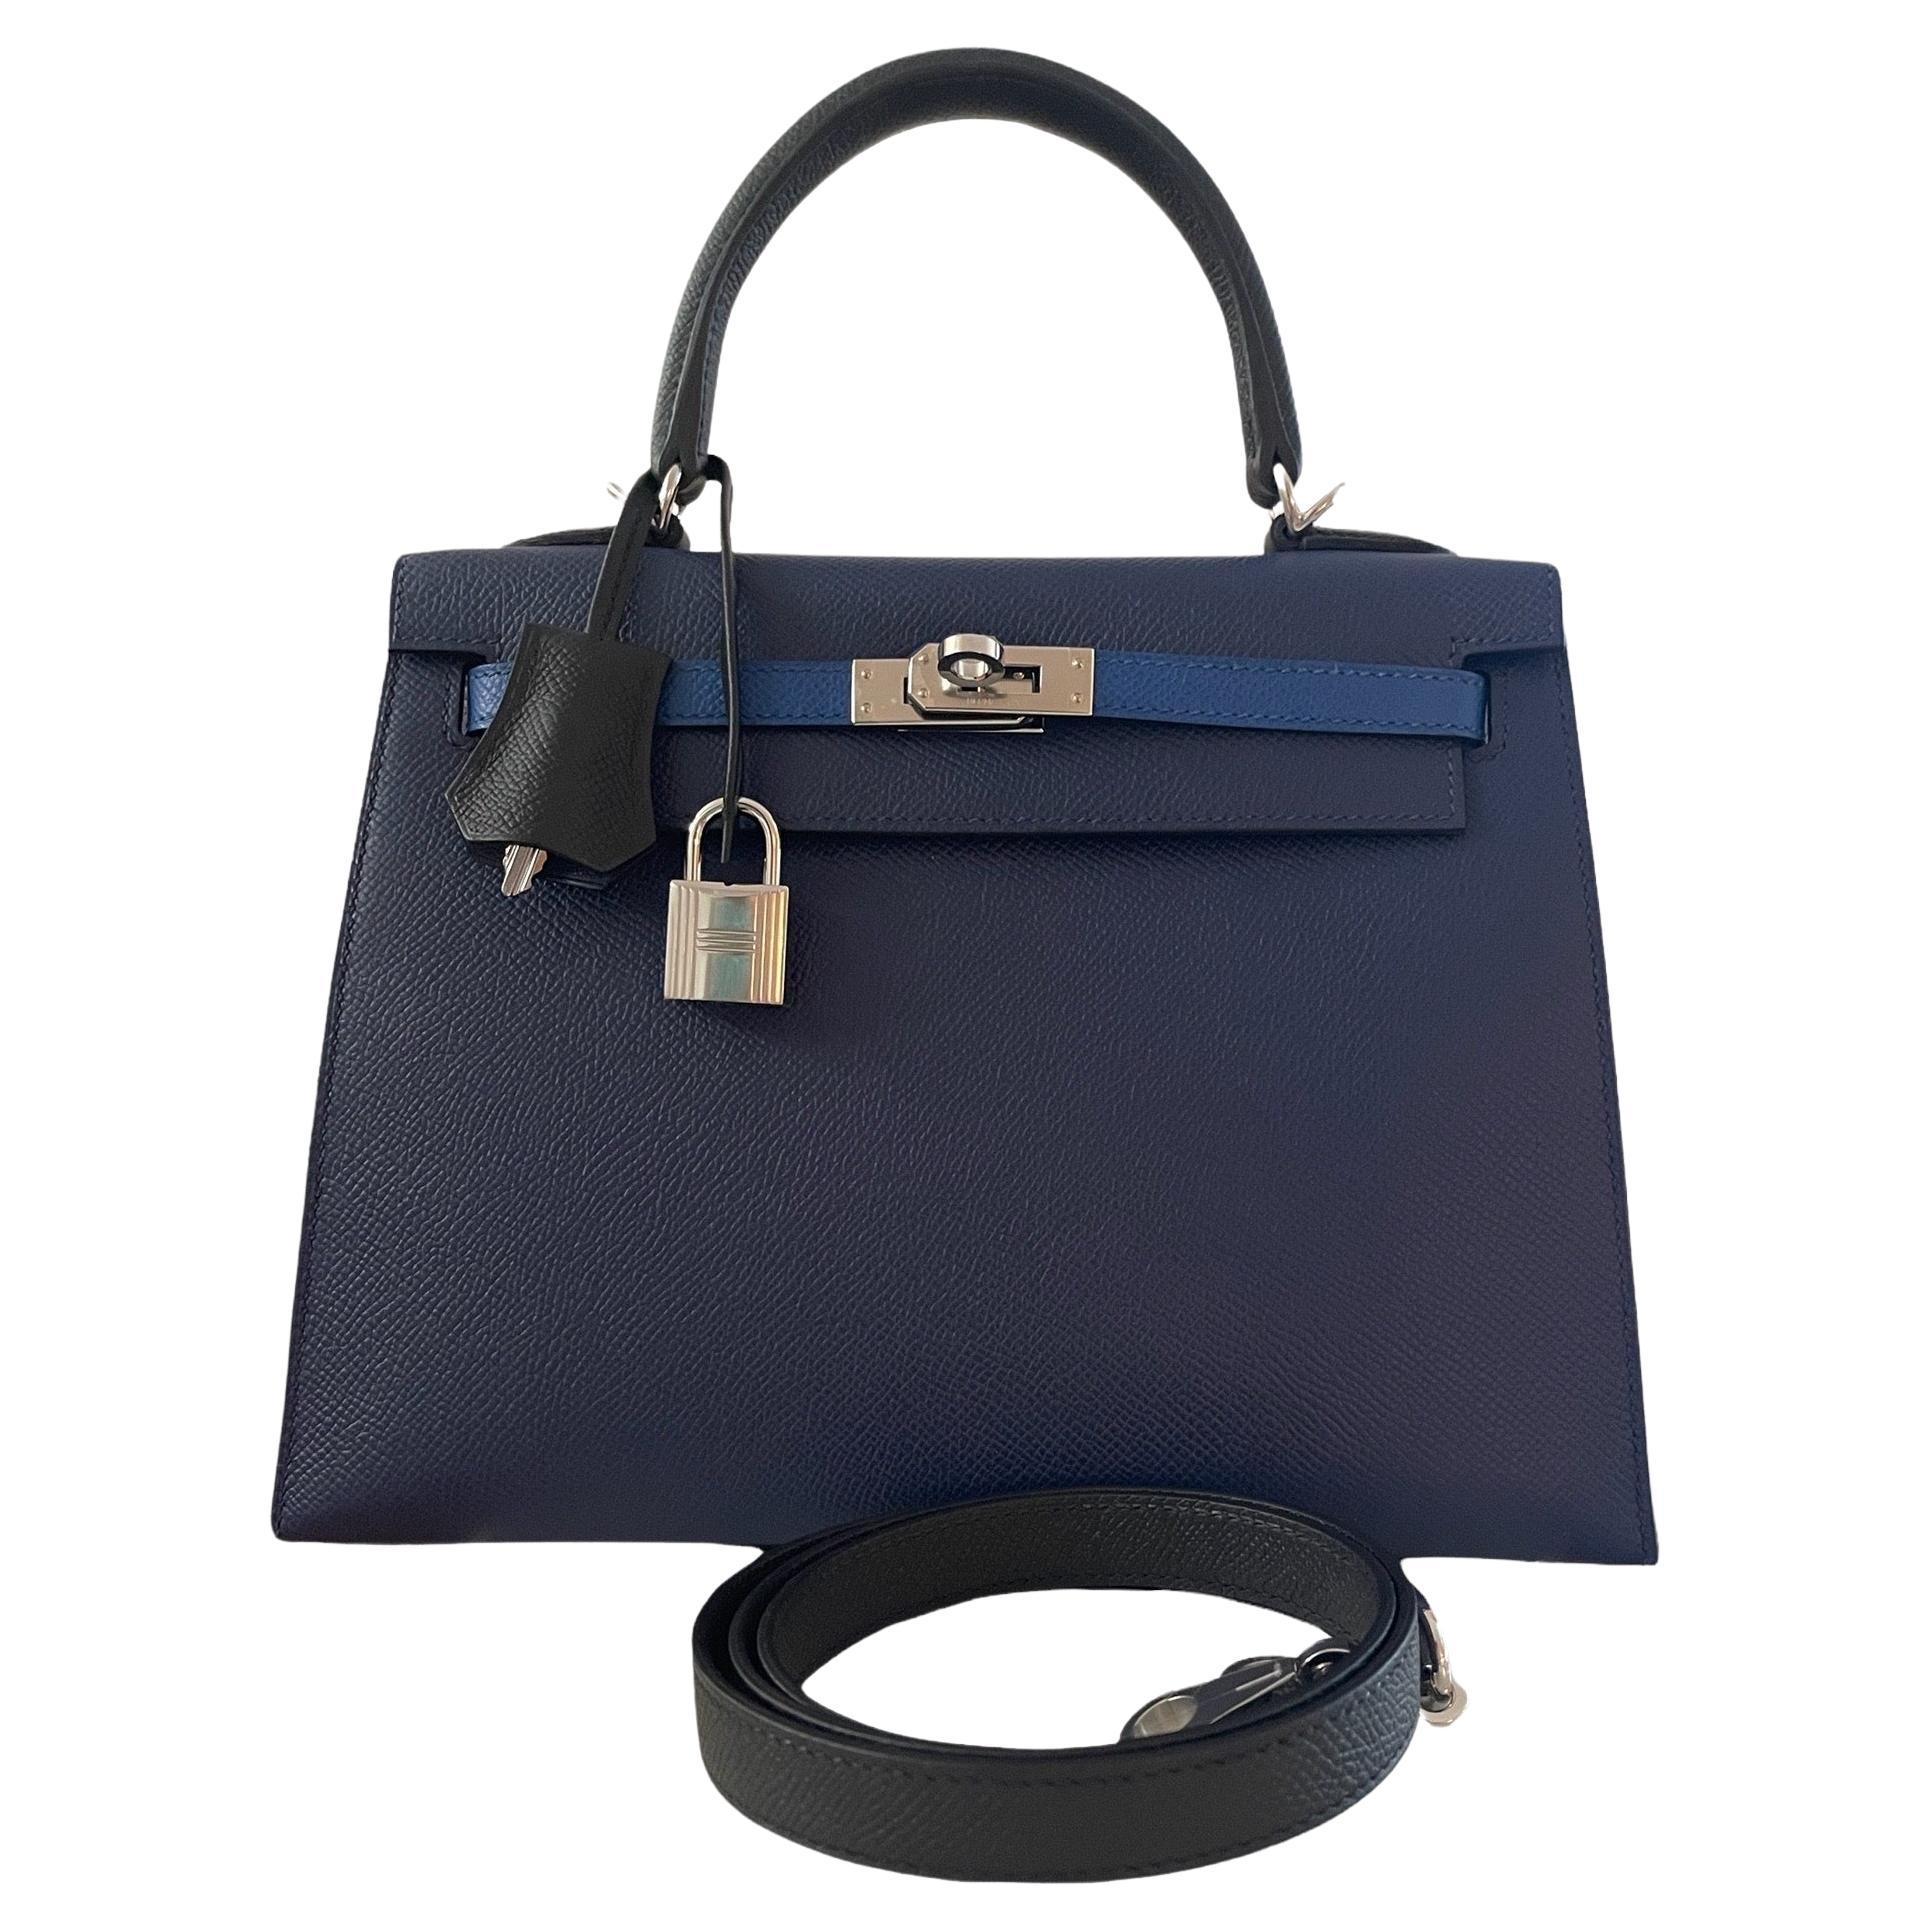 Hermes
Kelly 25cm Sellier
Most desired size in a Kelly
Tri Tones 
Introduced as a Limited Edition 
3 colors

The bag is blue saphire, the straps are blue france, and the handle is black, inside is blue saphire.
Dont miss out 
This Tri-Color Kelly is